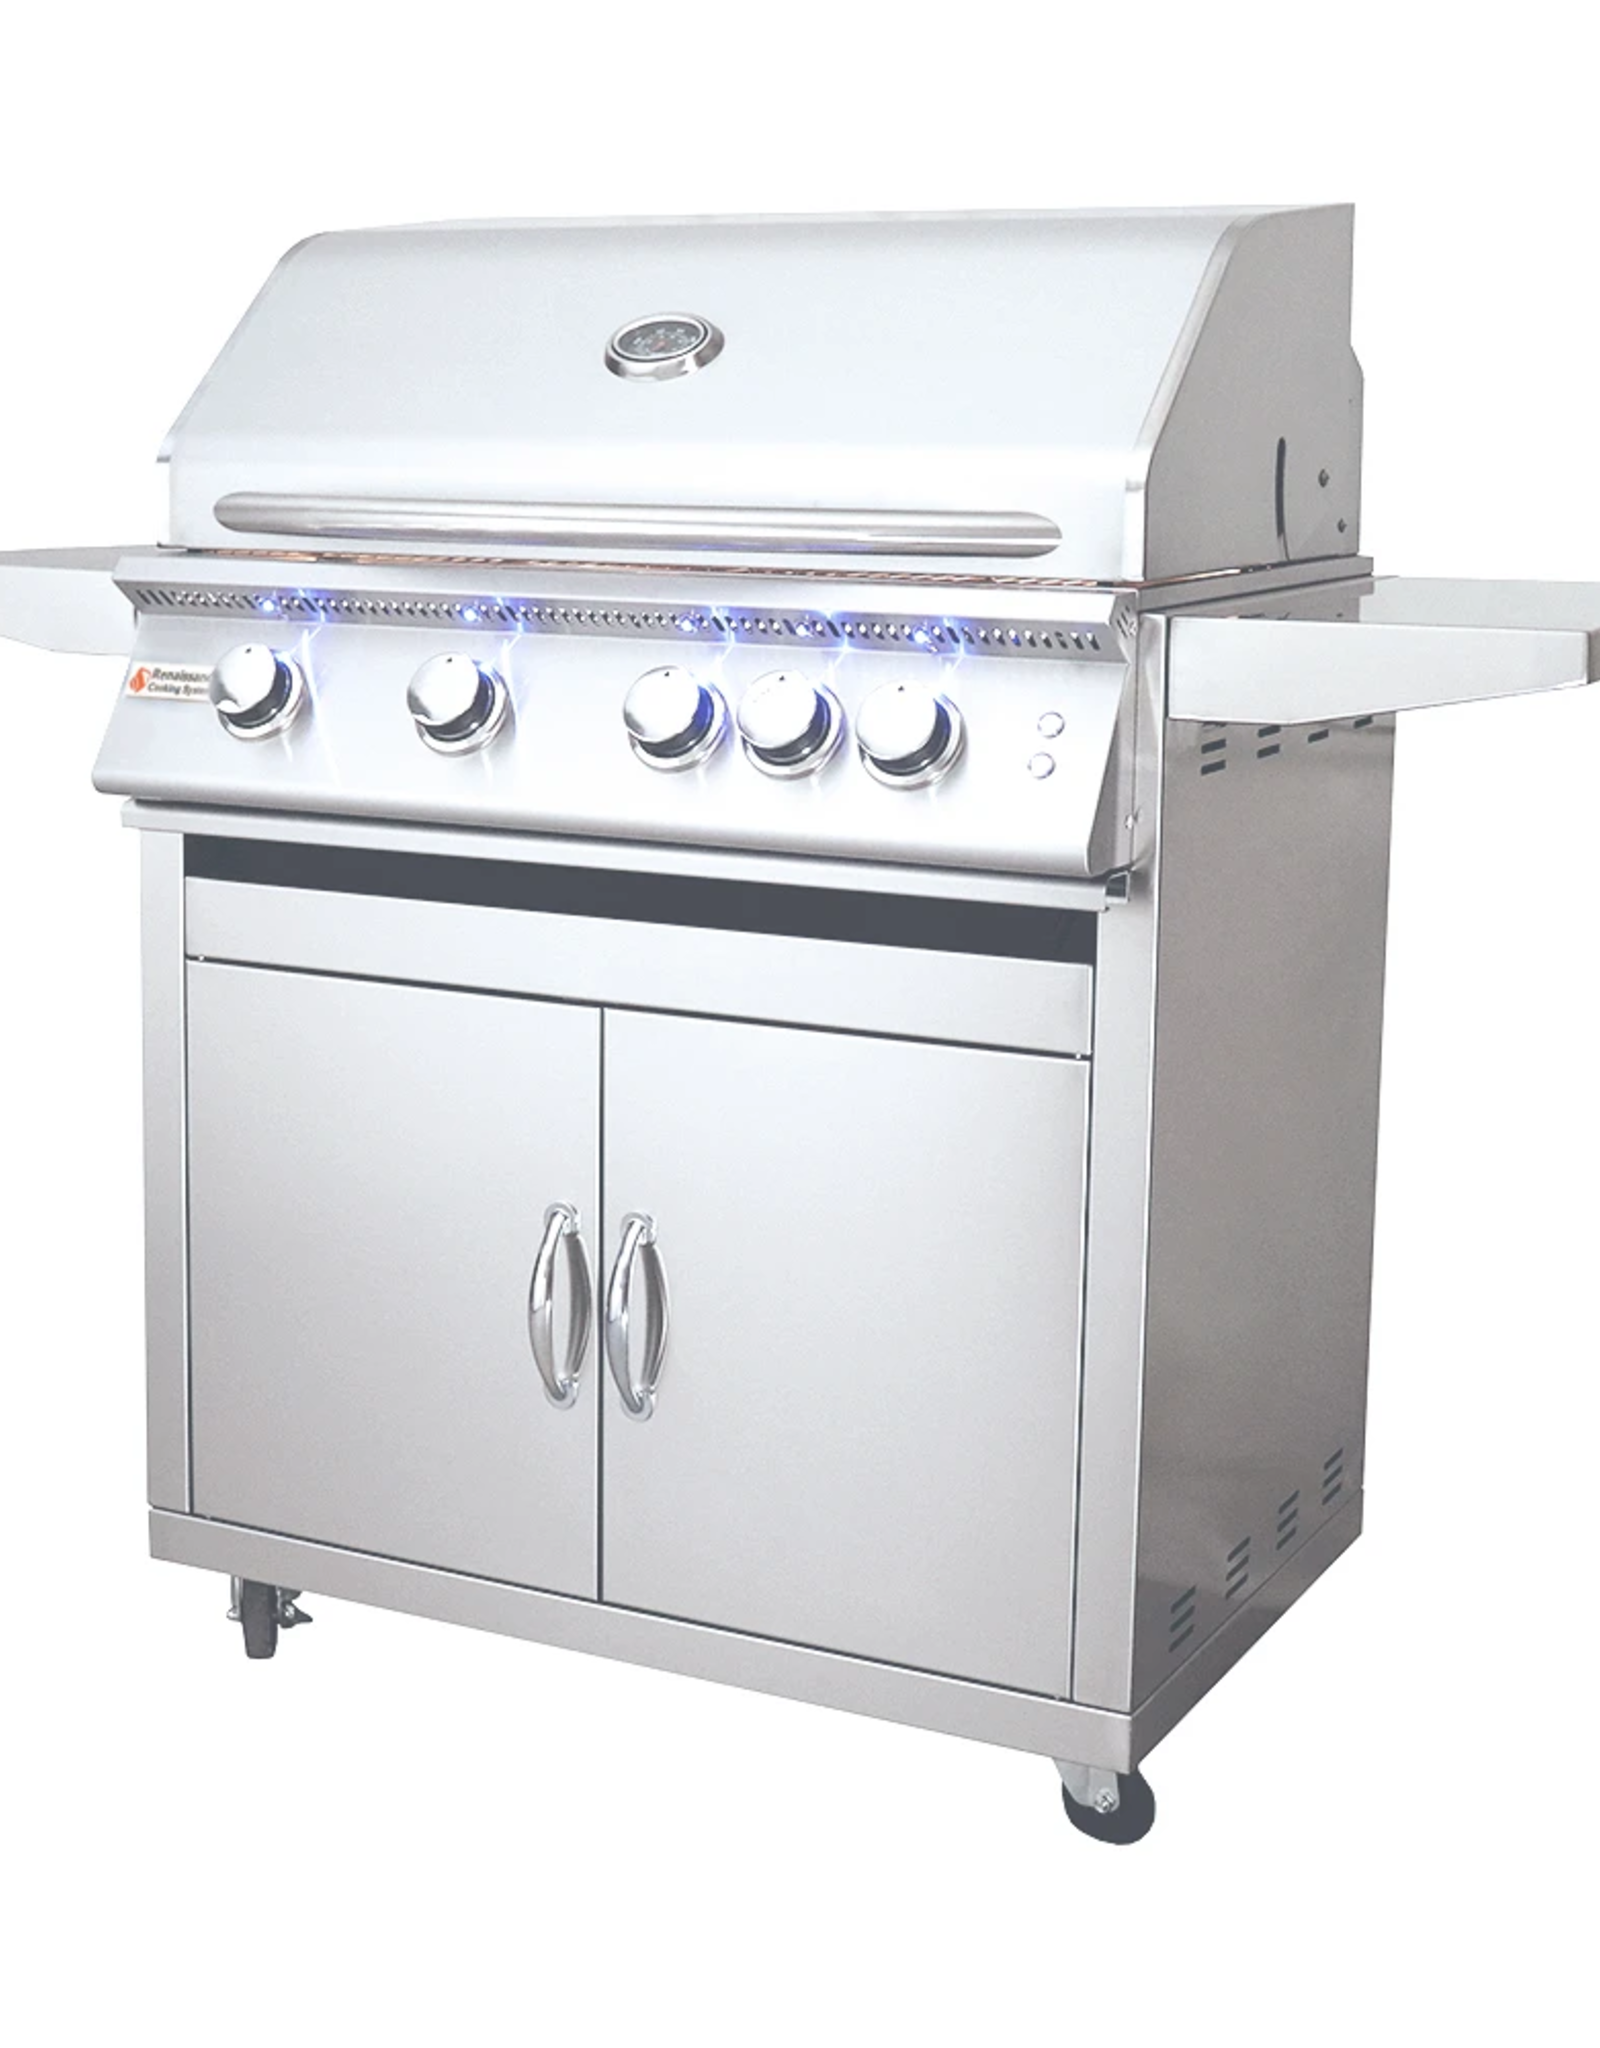 Renaissance Cooking Systems Renaissance Cooking Systems Portable Cart for 32" Premier Series Grills - RJCMC